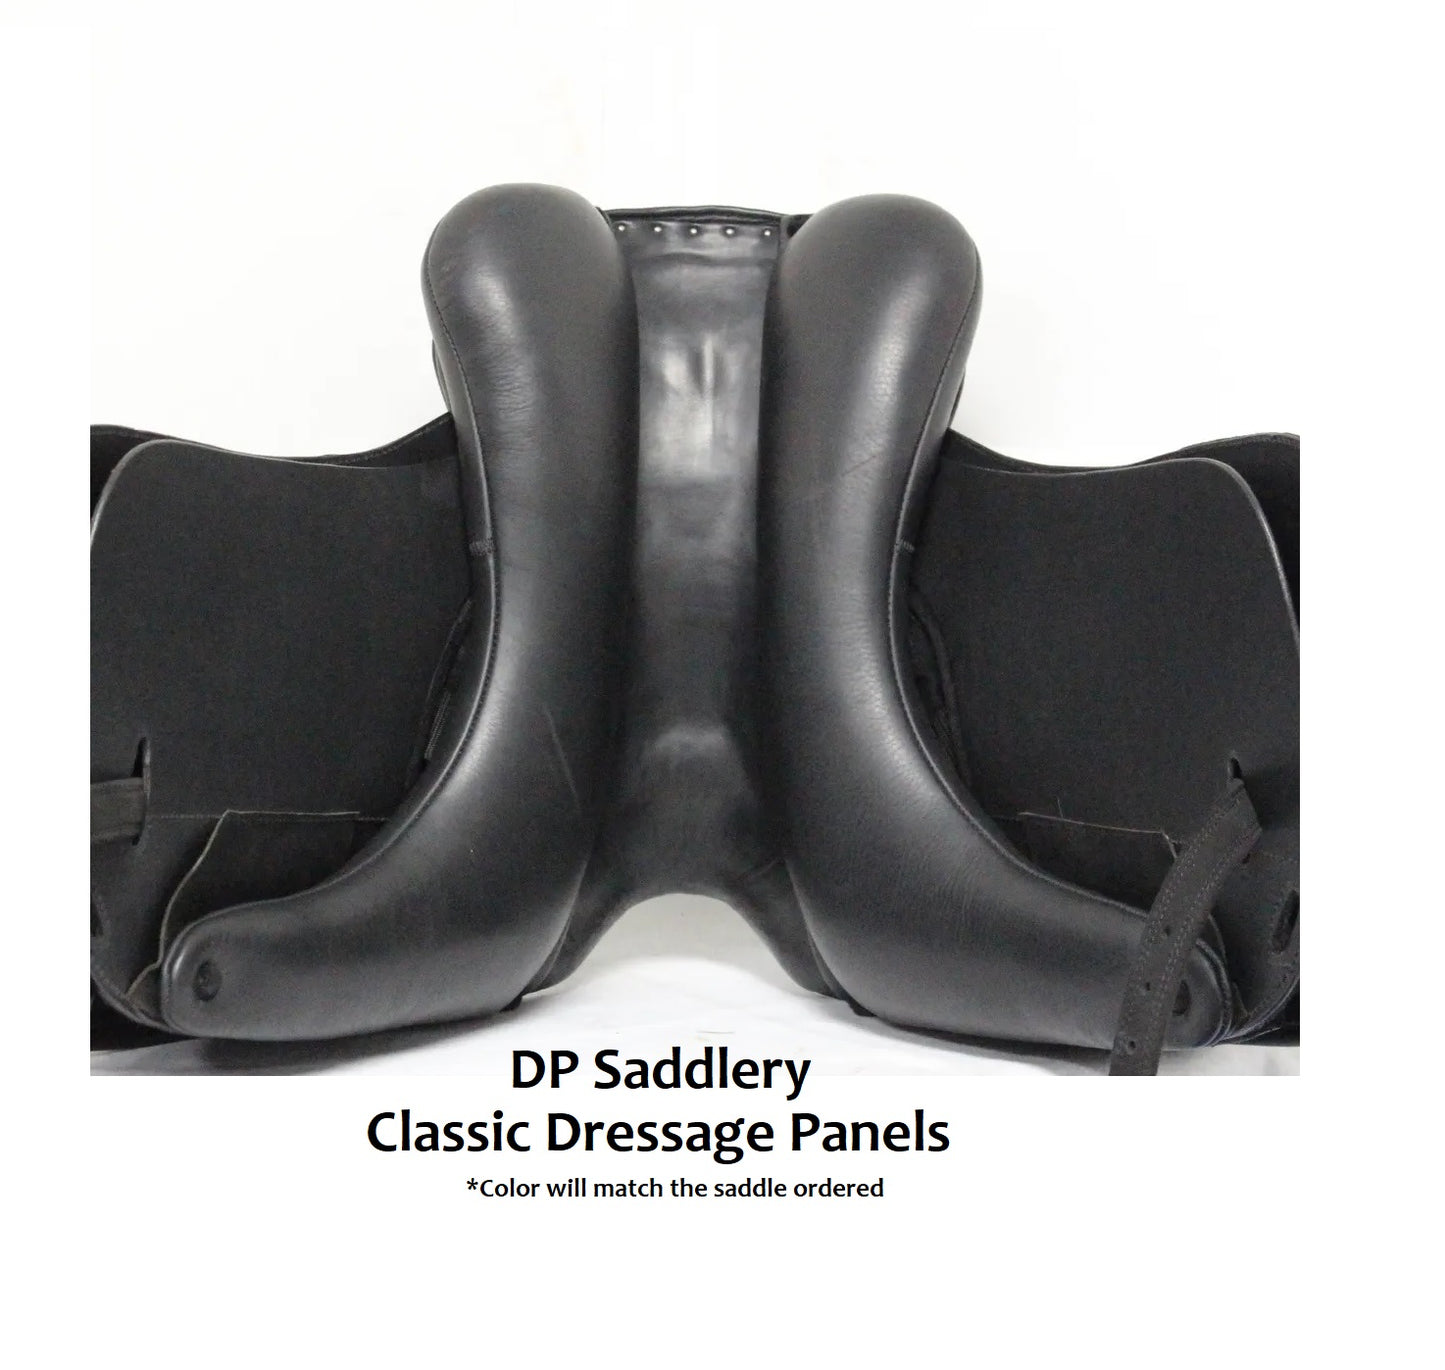 DP Saddlery Classic Dressage 5406 17.5 in